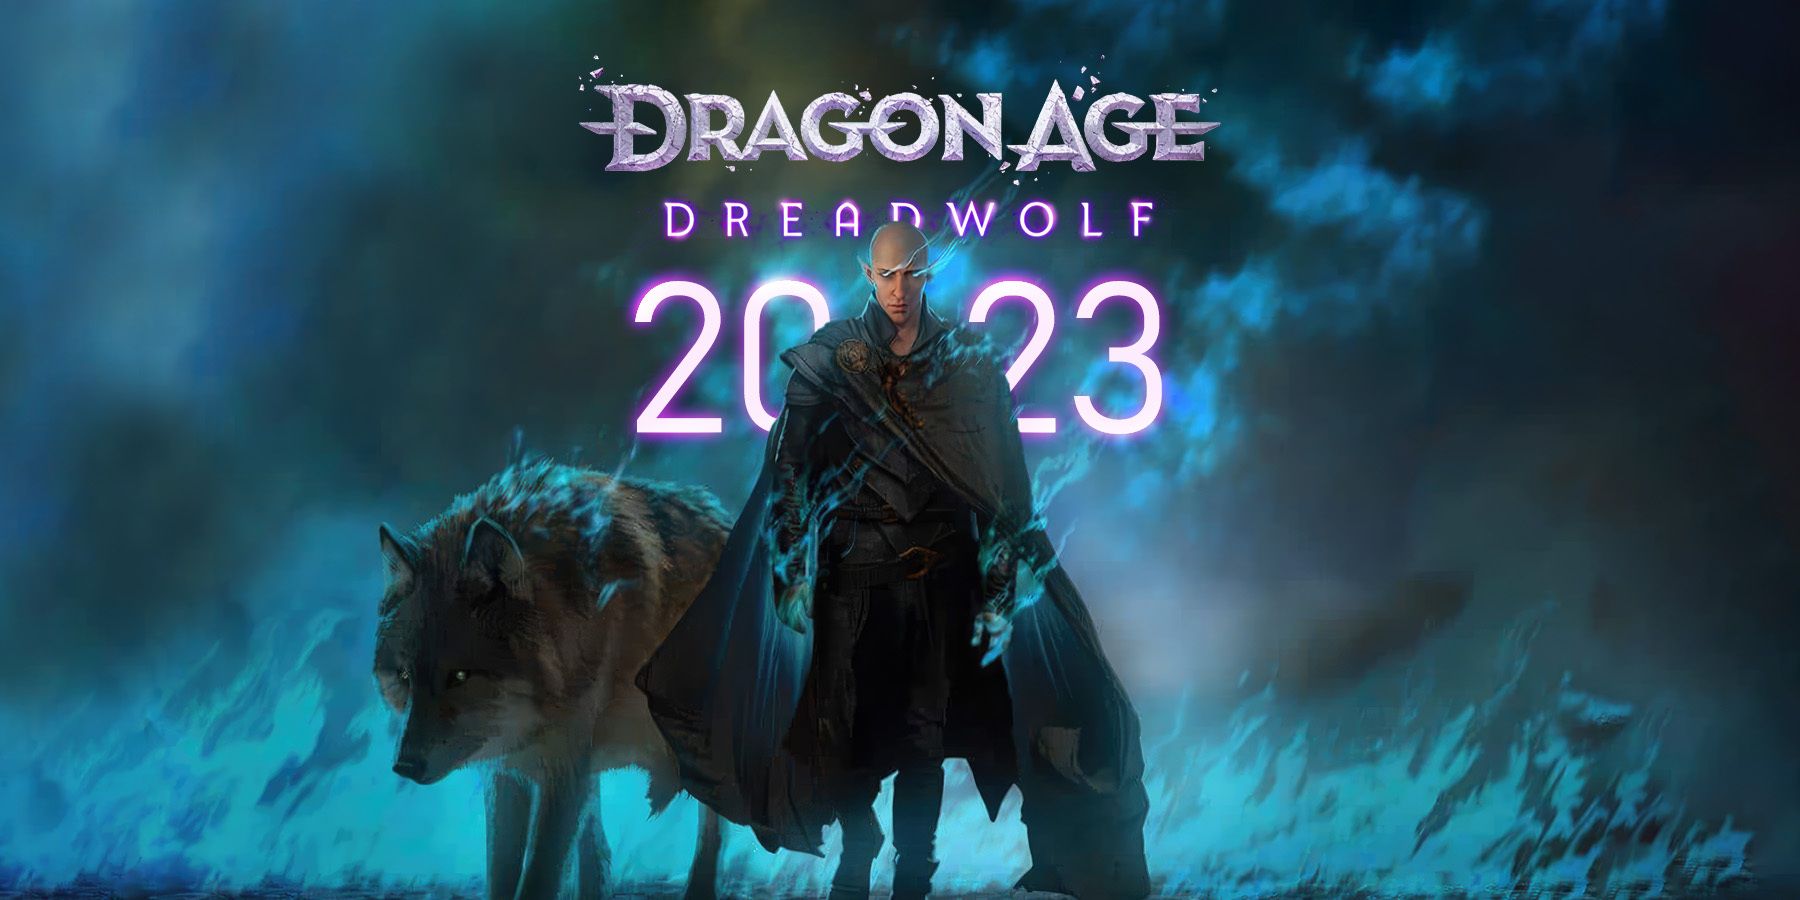 Dragon Age: Dreadwolf: release date speculation, trailers